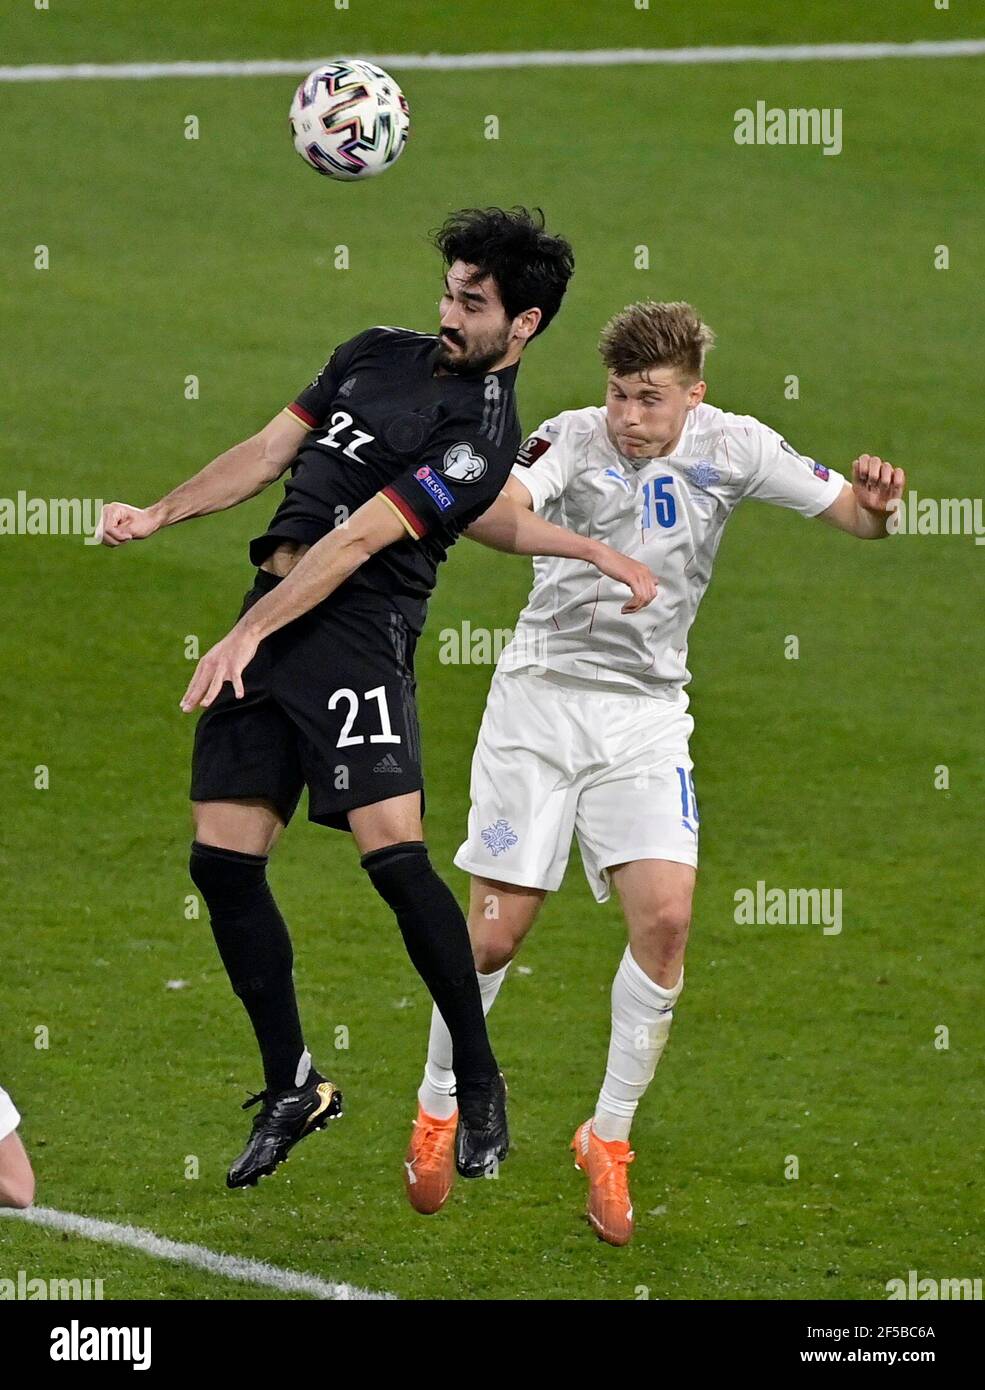 Soccer Football - World Cup Qualifiers Europe - Group J - Germany v Iceland - MSV-Arena, Duisburg, Germany - March 25, 2021 Germany's Ilkay Gundogan in action with Iceland's Alfons Sampsted REUTERS/Tobias Schwarz Stock Photo